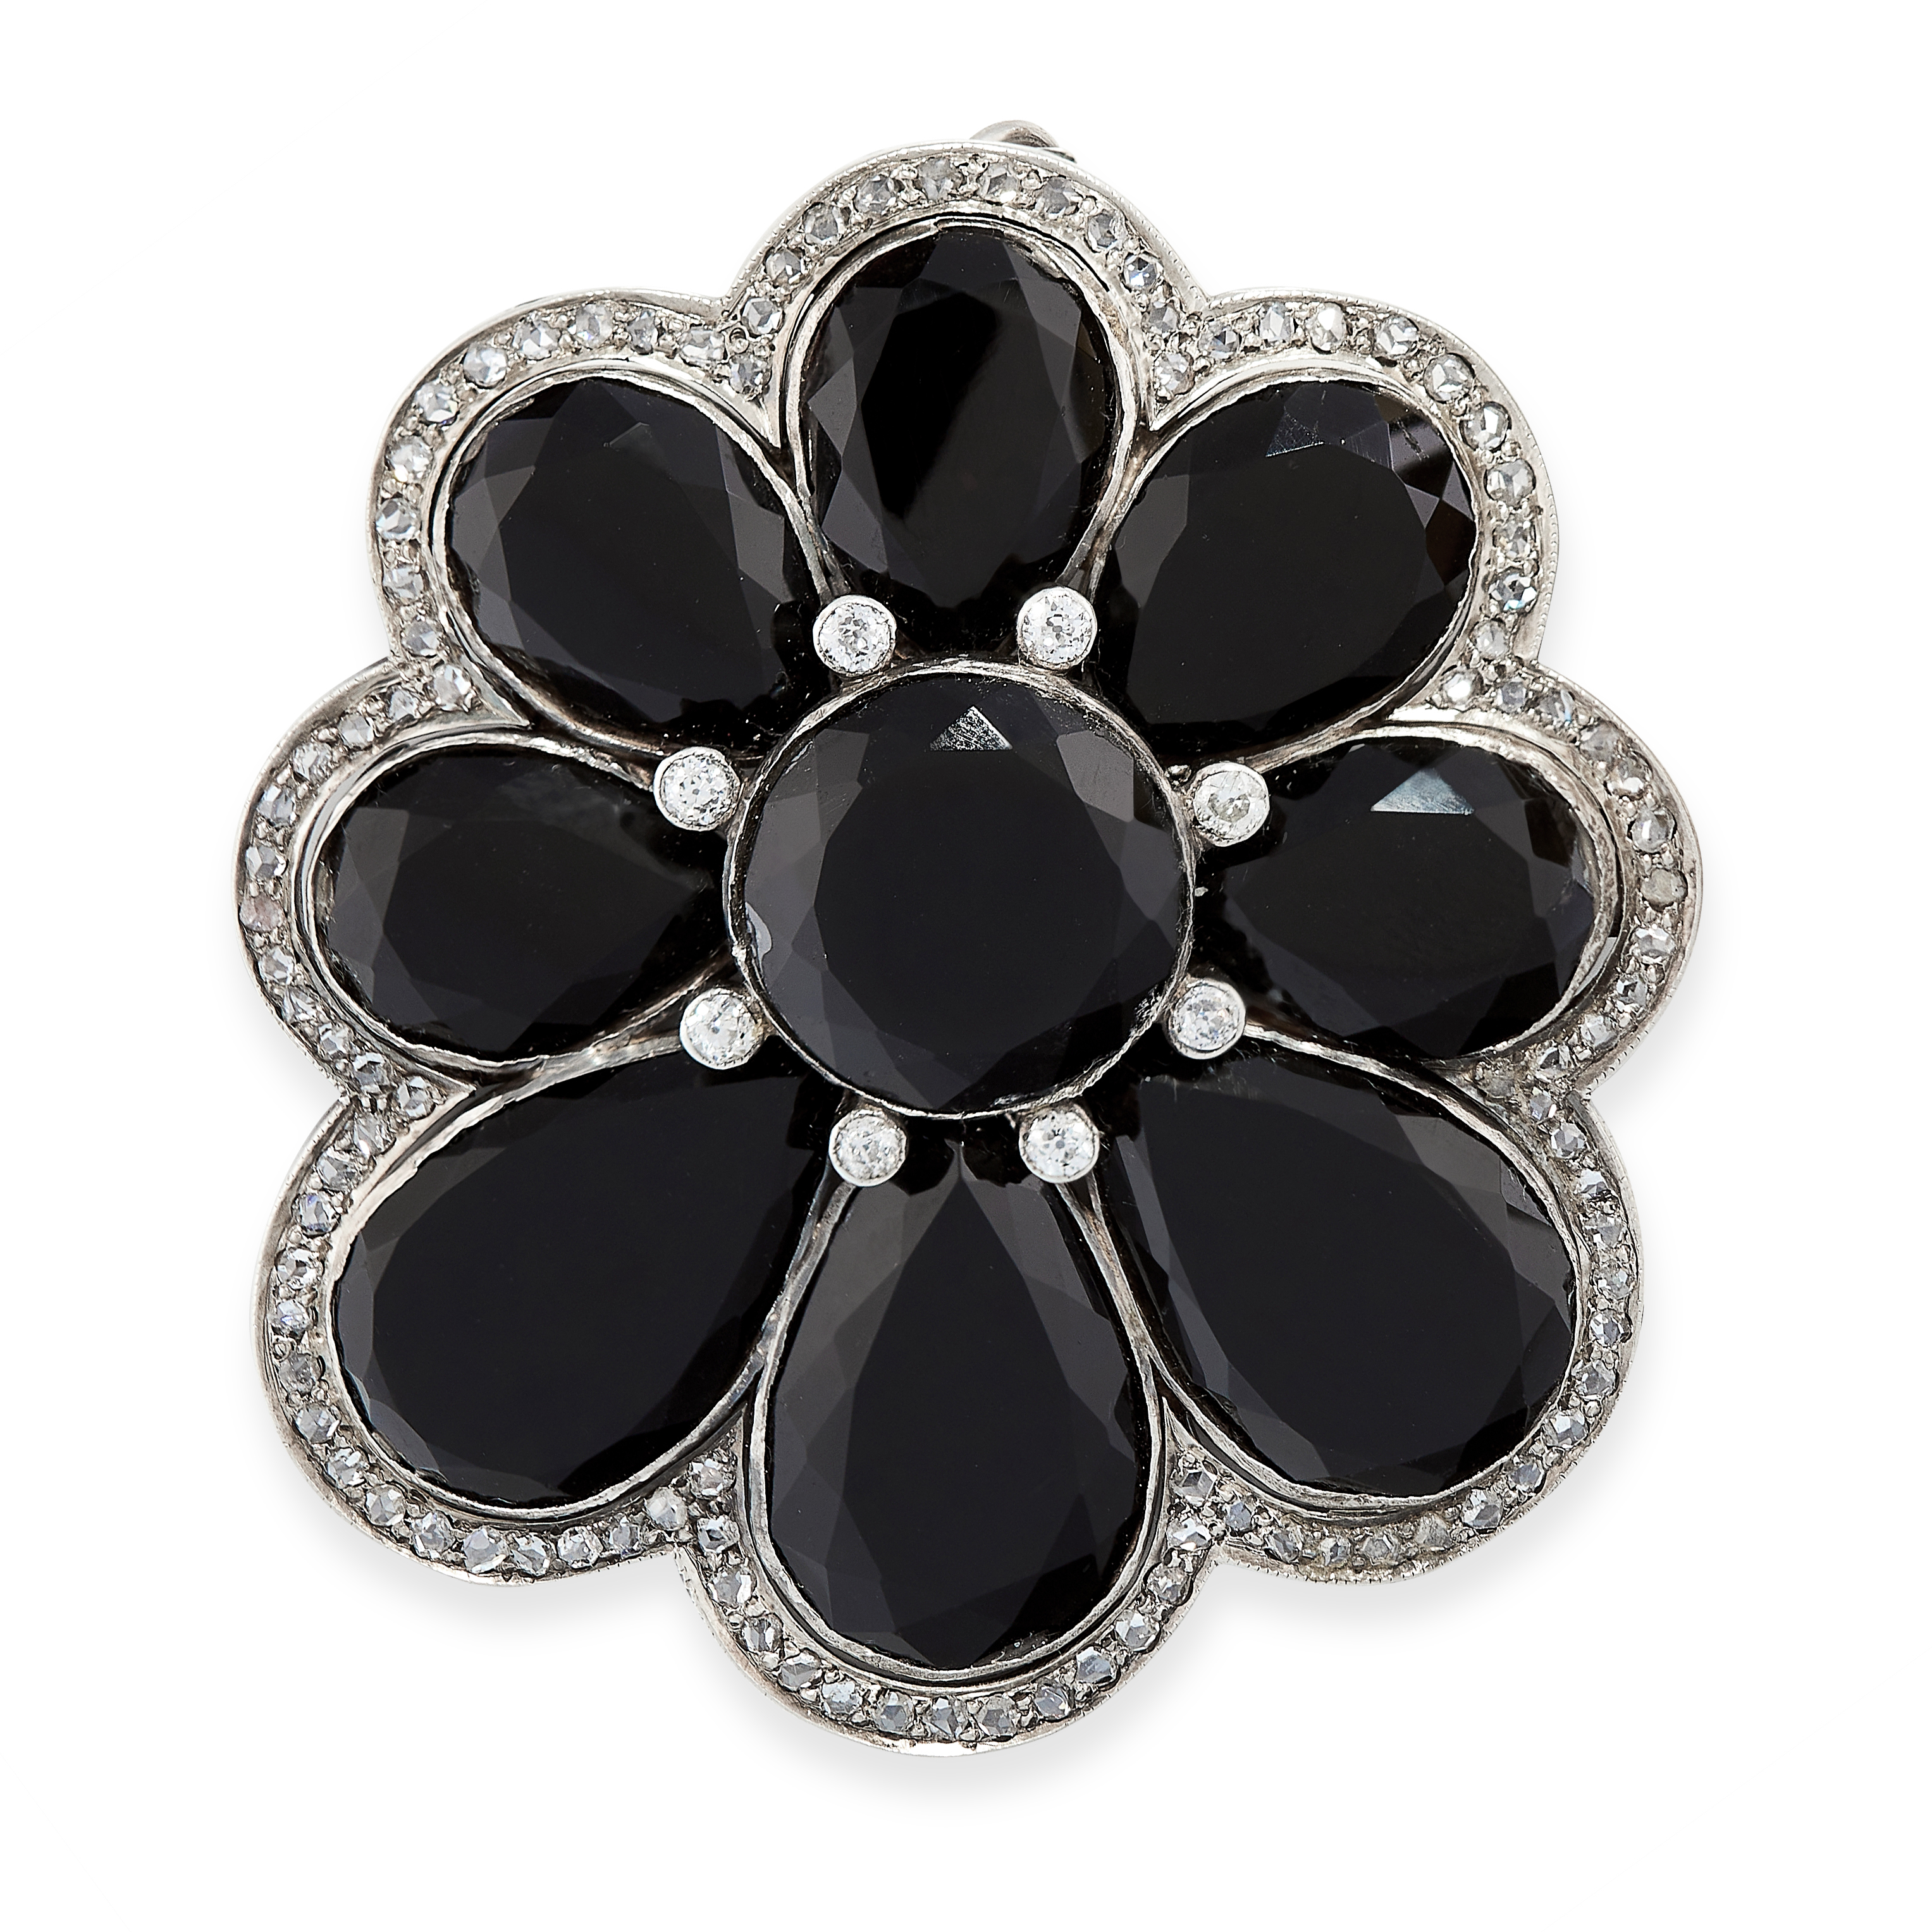 ONYX AND DIAMOND PENDANT / BROOCH, EARLY 20TH CENTURY of scalloped design, set with a cluster of